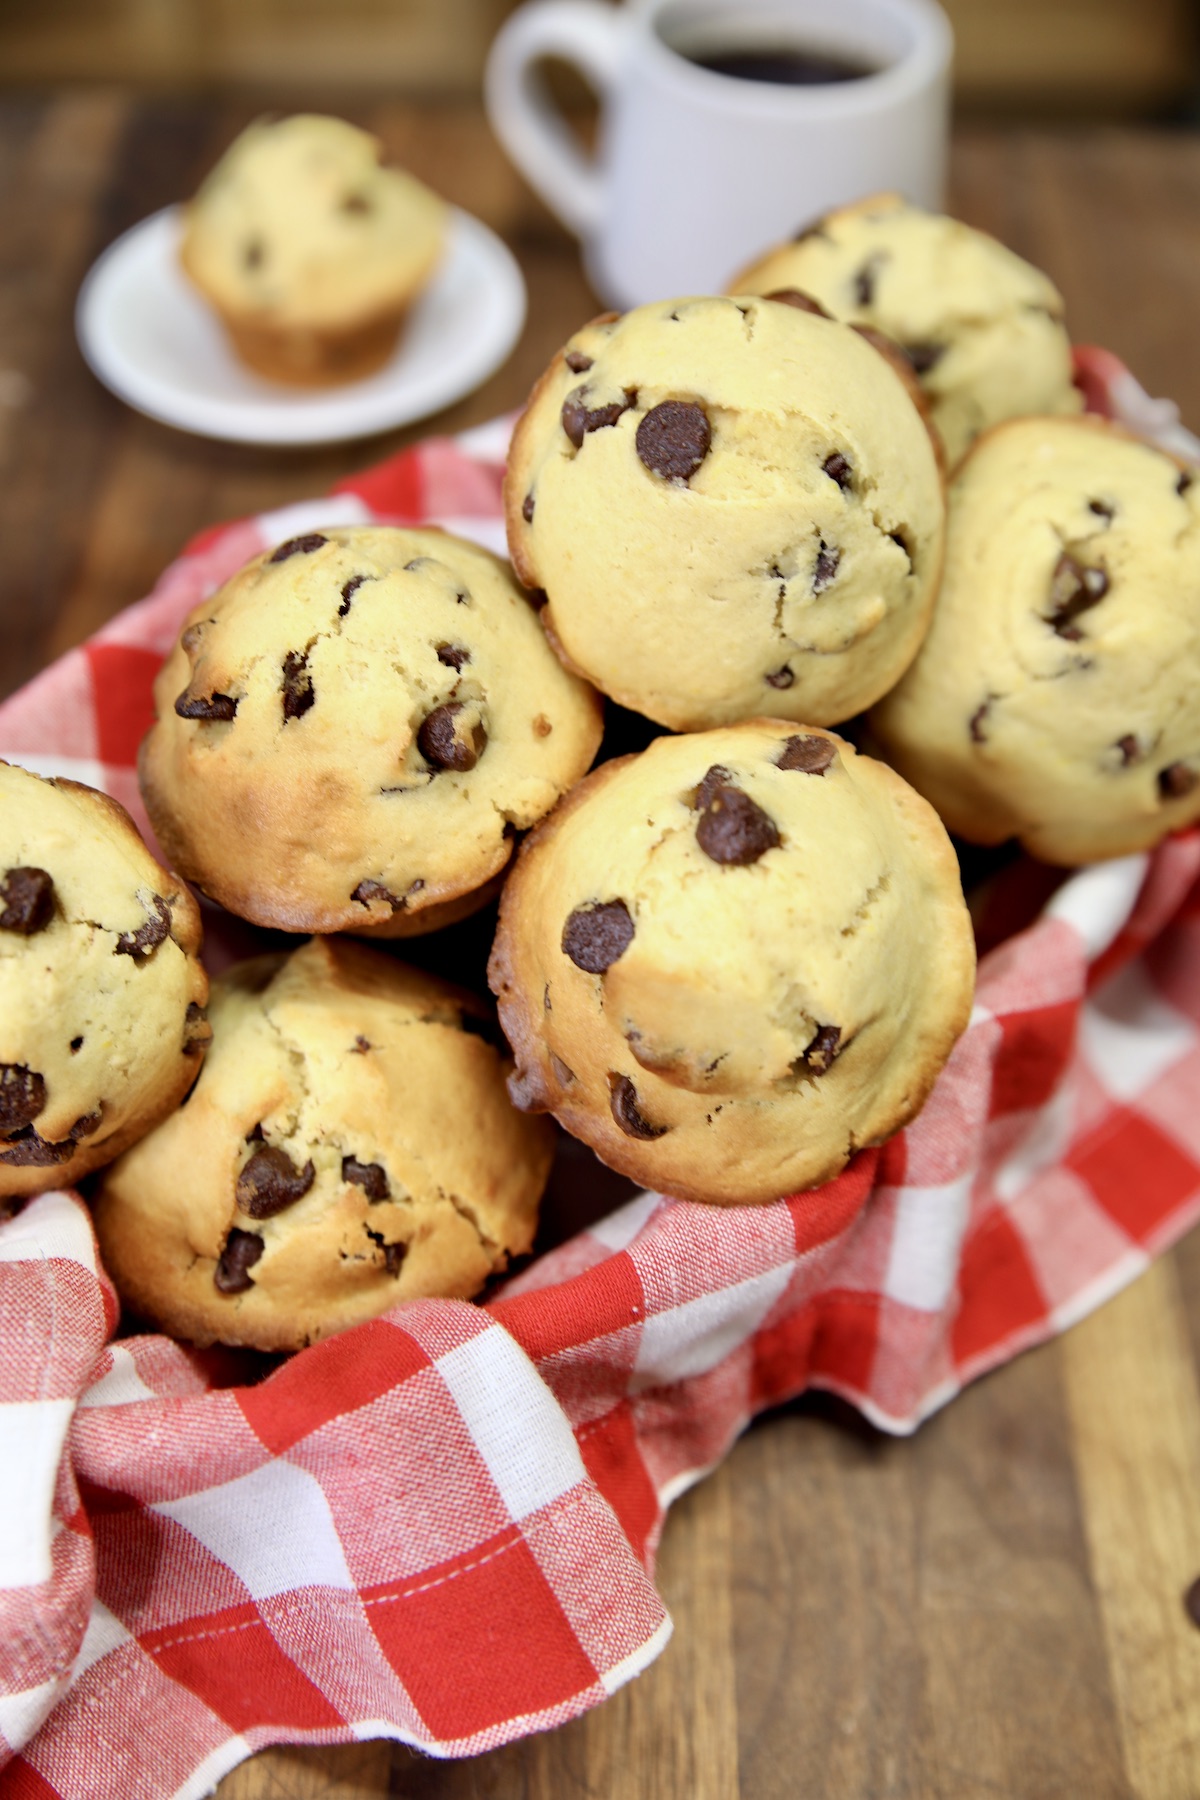 Chocolate chip muffins in a basket.